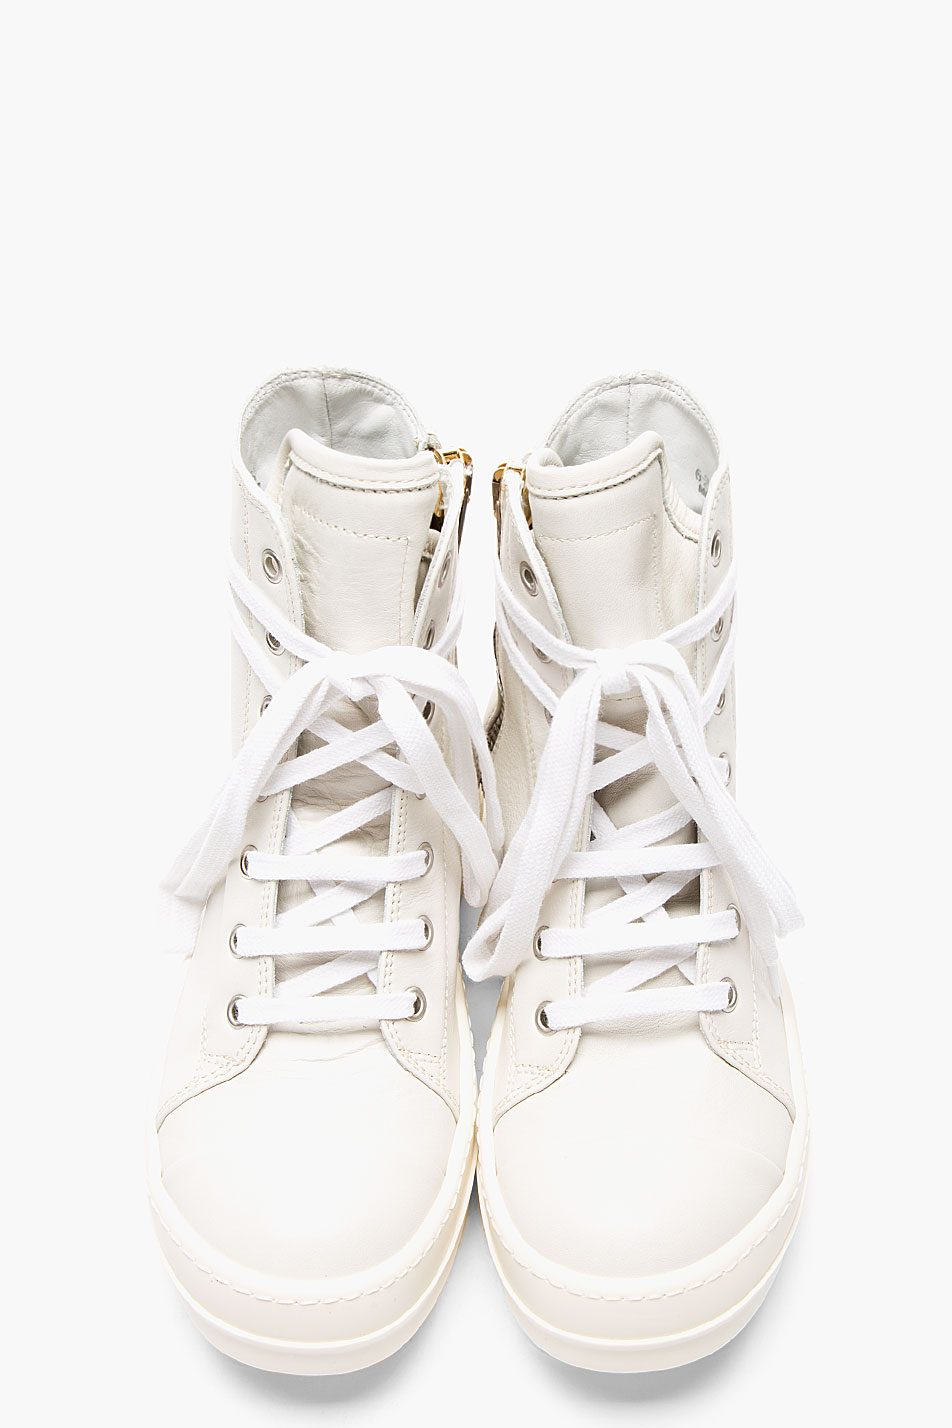 Rick Owens White Leather Ramones Sneakers - Lyst